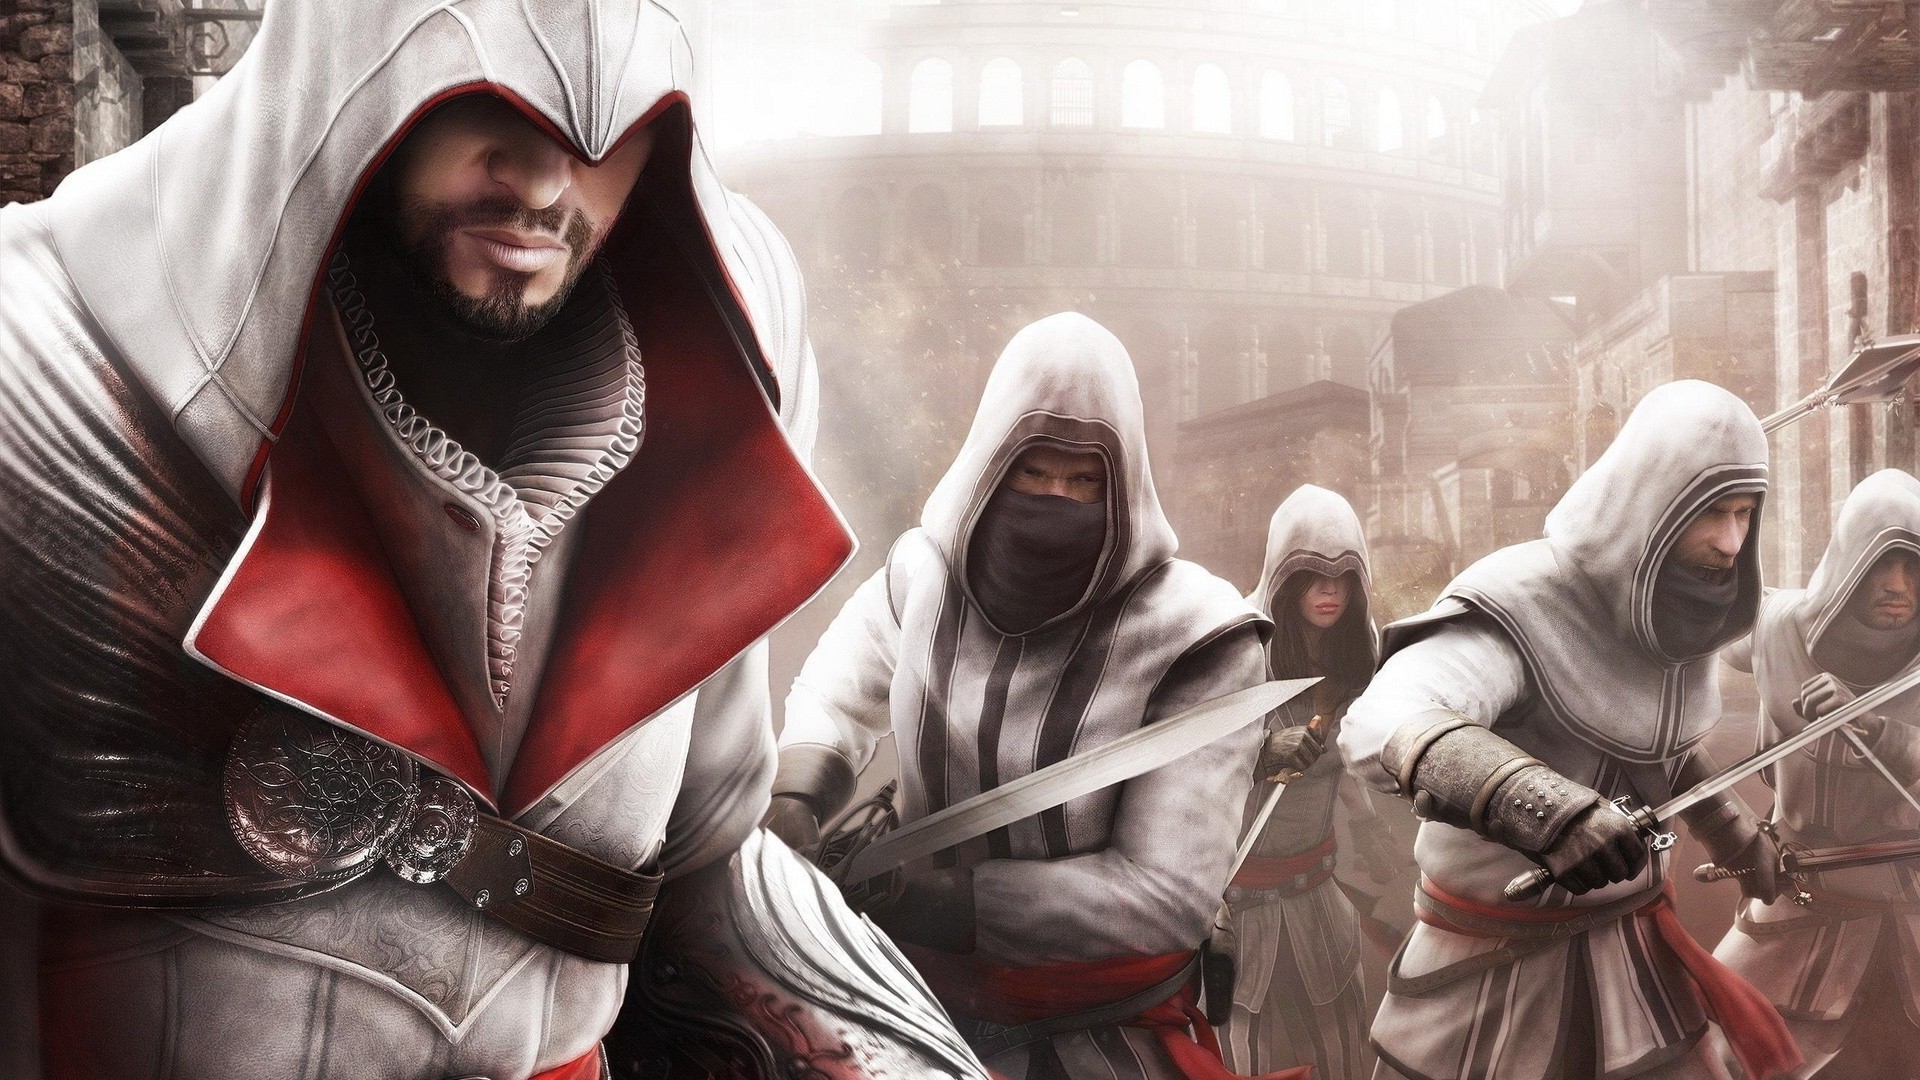 what is the full creed of the assassin brotherhood